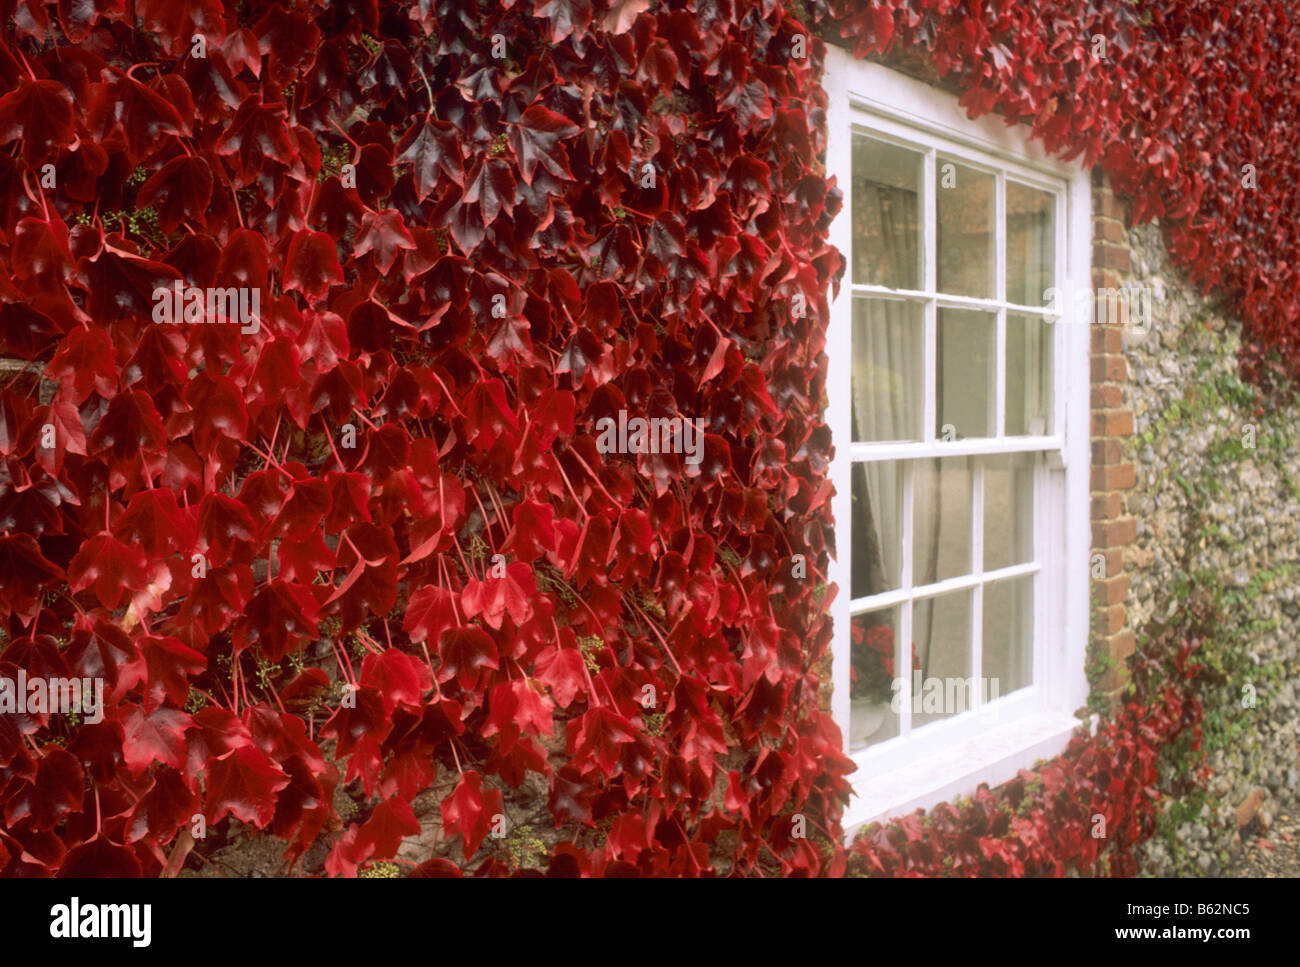 Parthenocissus tricuspidata house window red scarlet leaf leaves Autumn foliage Autumnal growing on wall Virginia Creeper Stock Photo